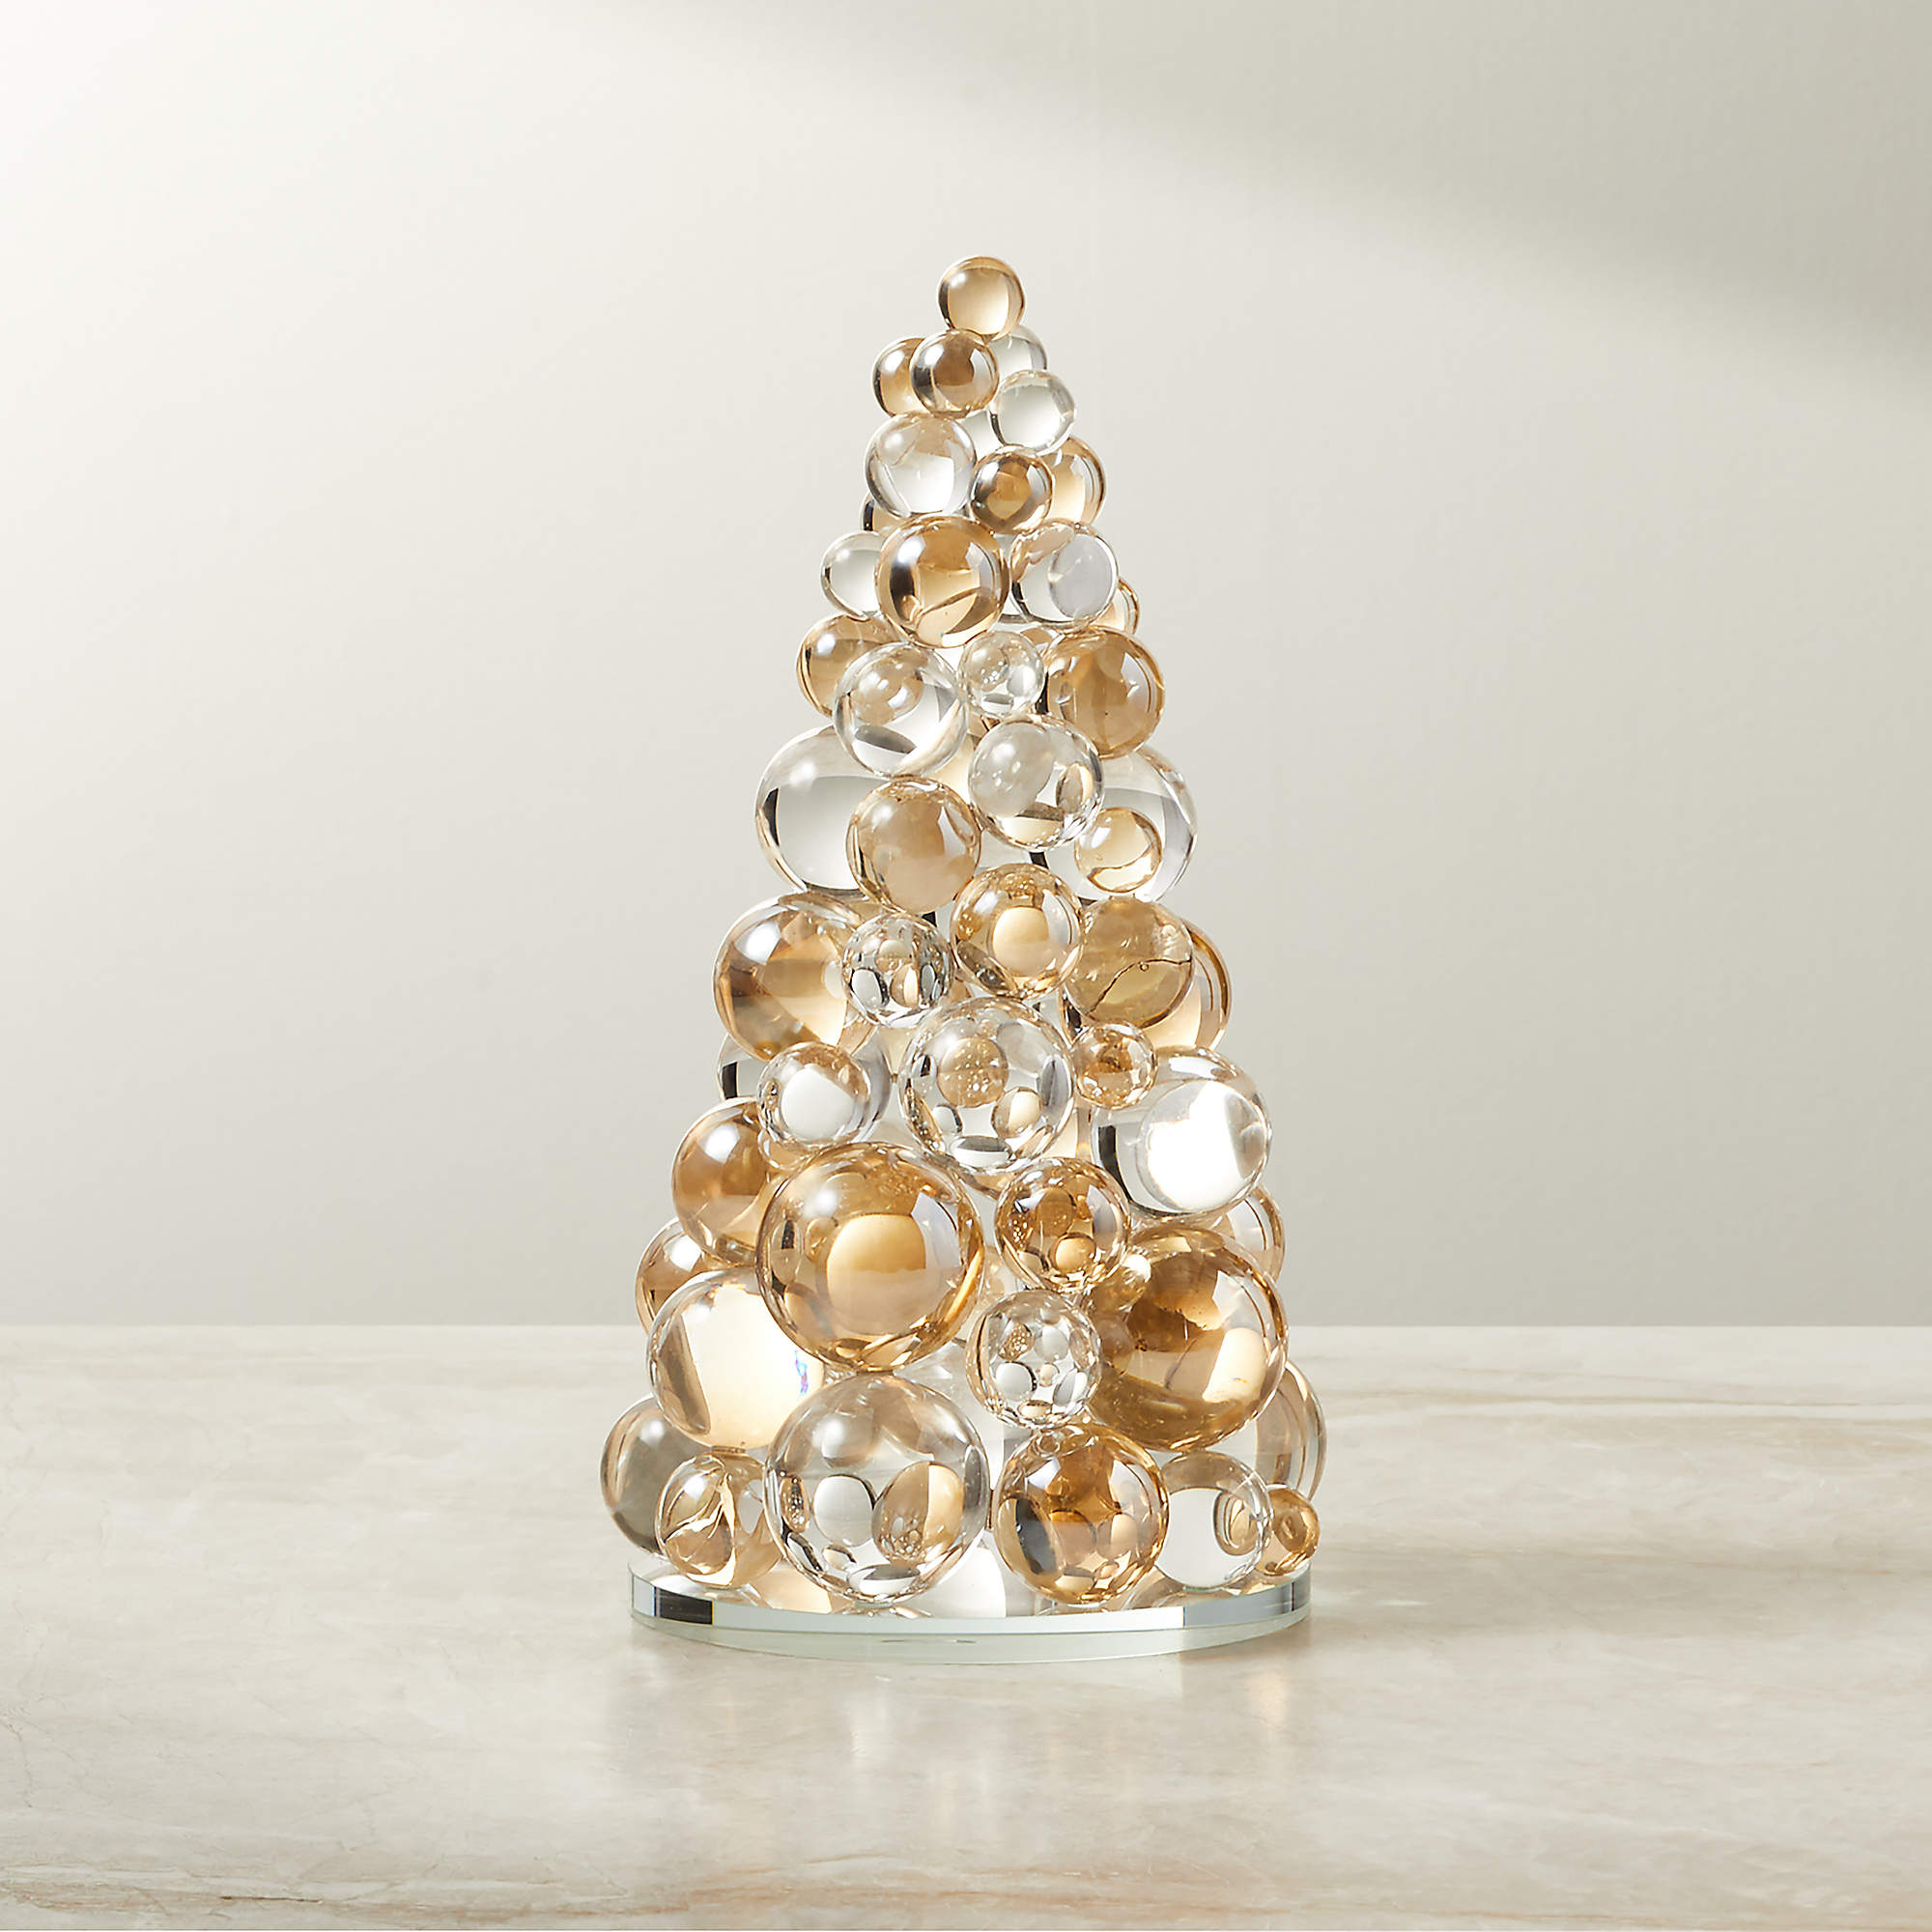 Decor Desires: Law Roach’s CB2 Holiday Edit Is Giving Opulent Luxury